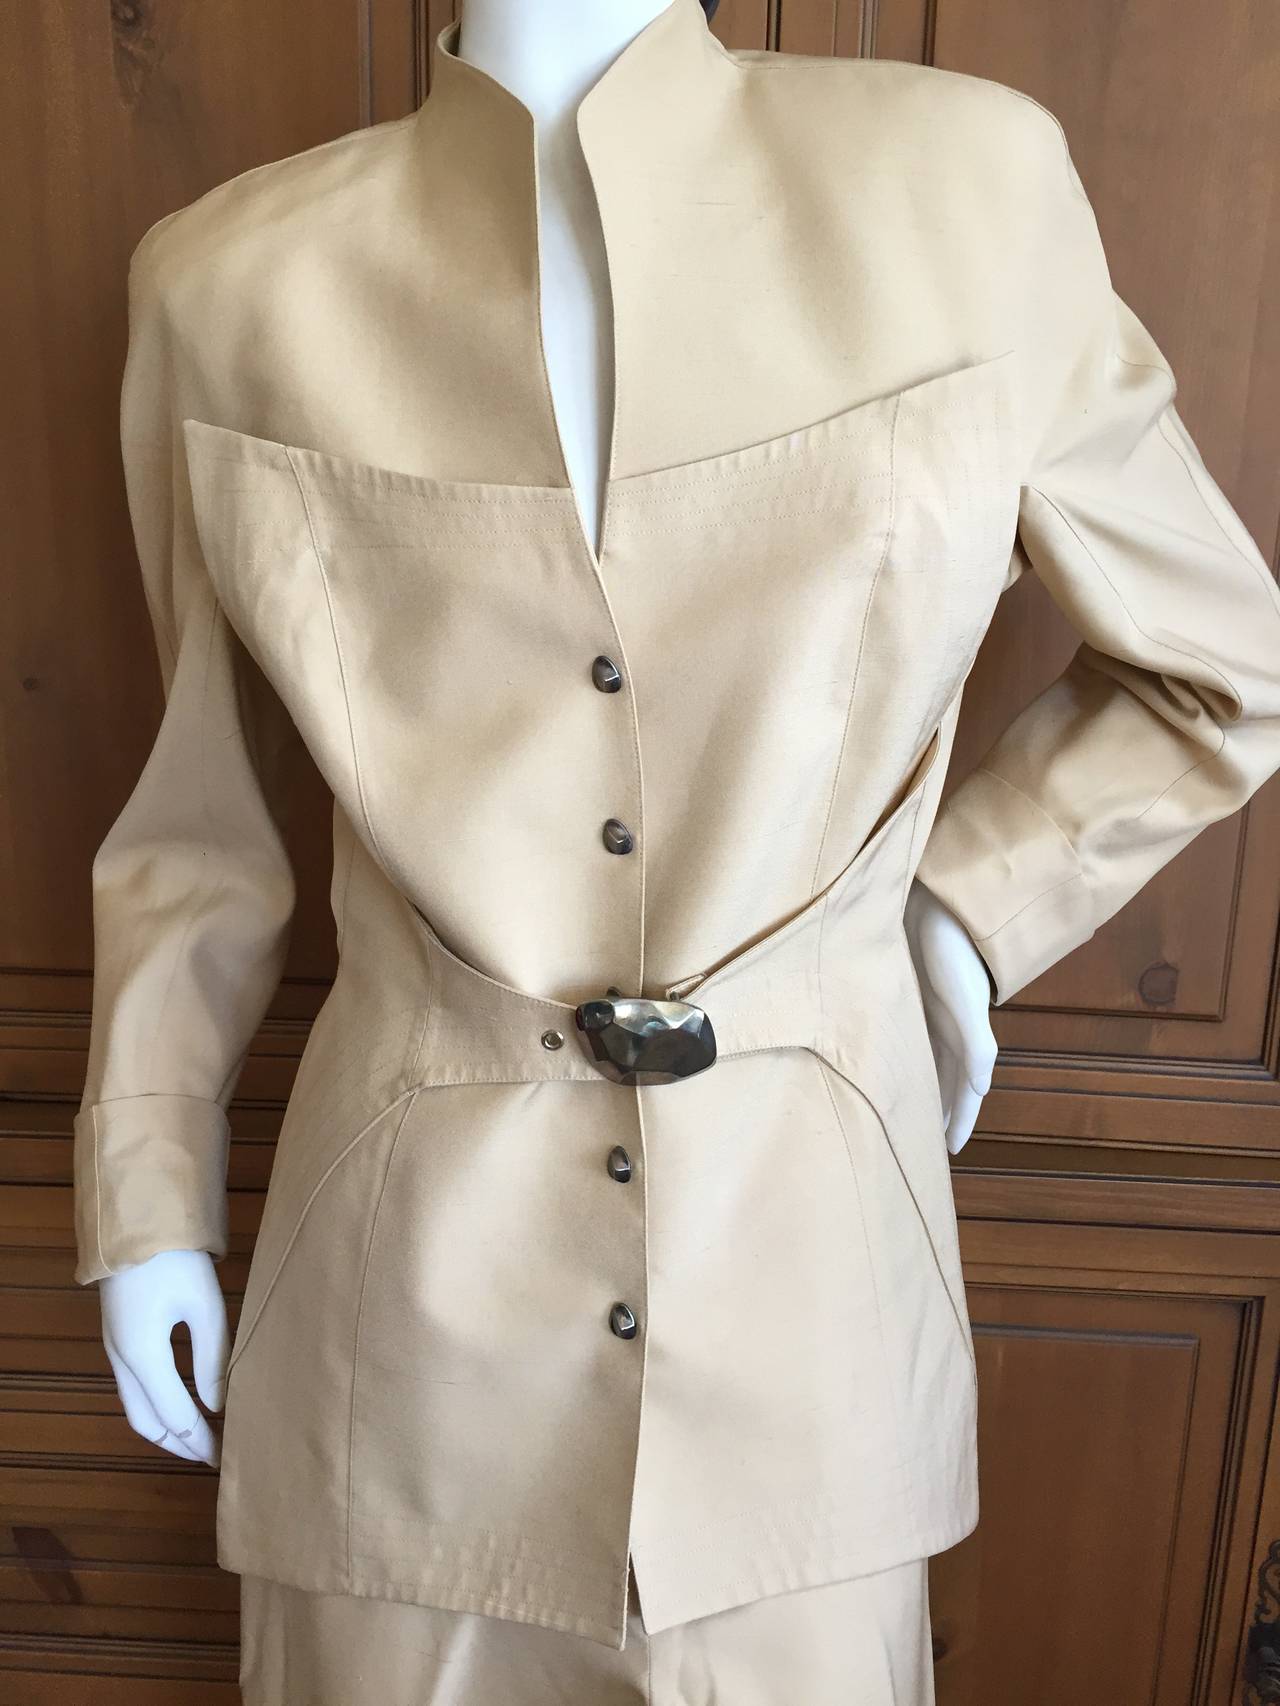 Thierry Mugler Sculptural Tan Silk Jacket with matching pants .
Featuring a snap front jacket with half belt, and a matching pair of trousers.